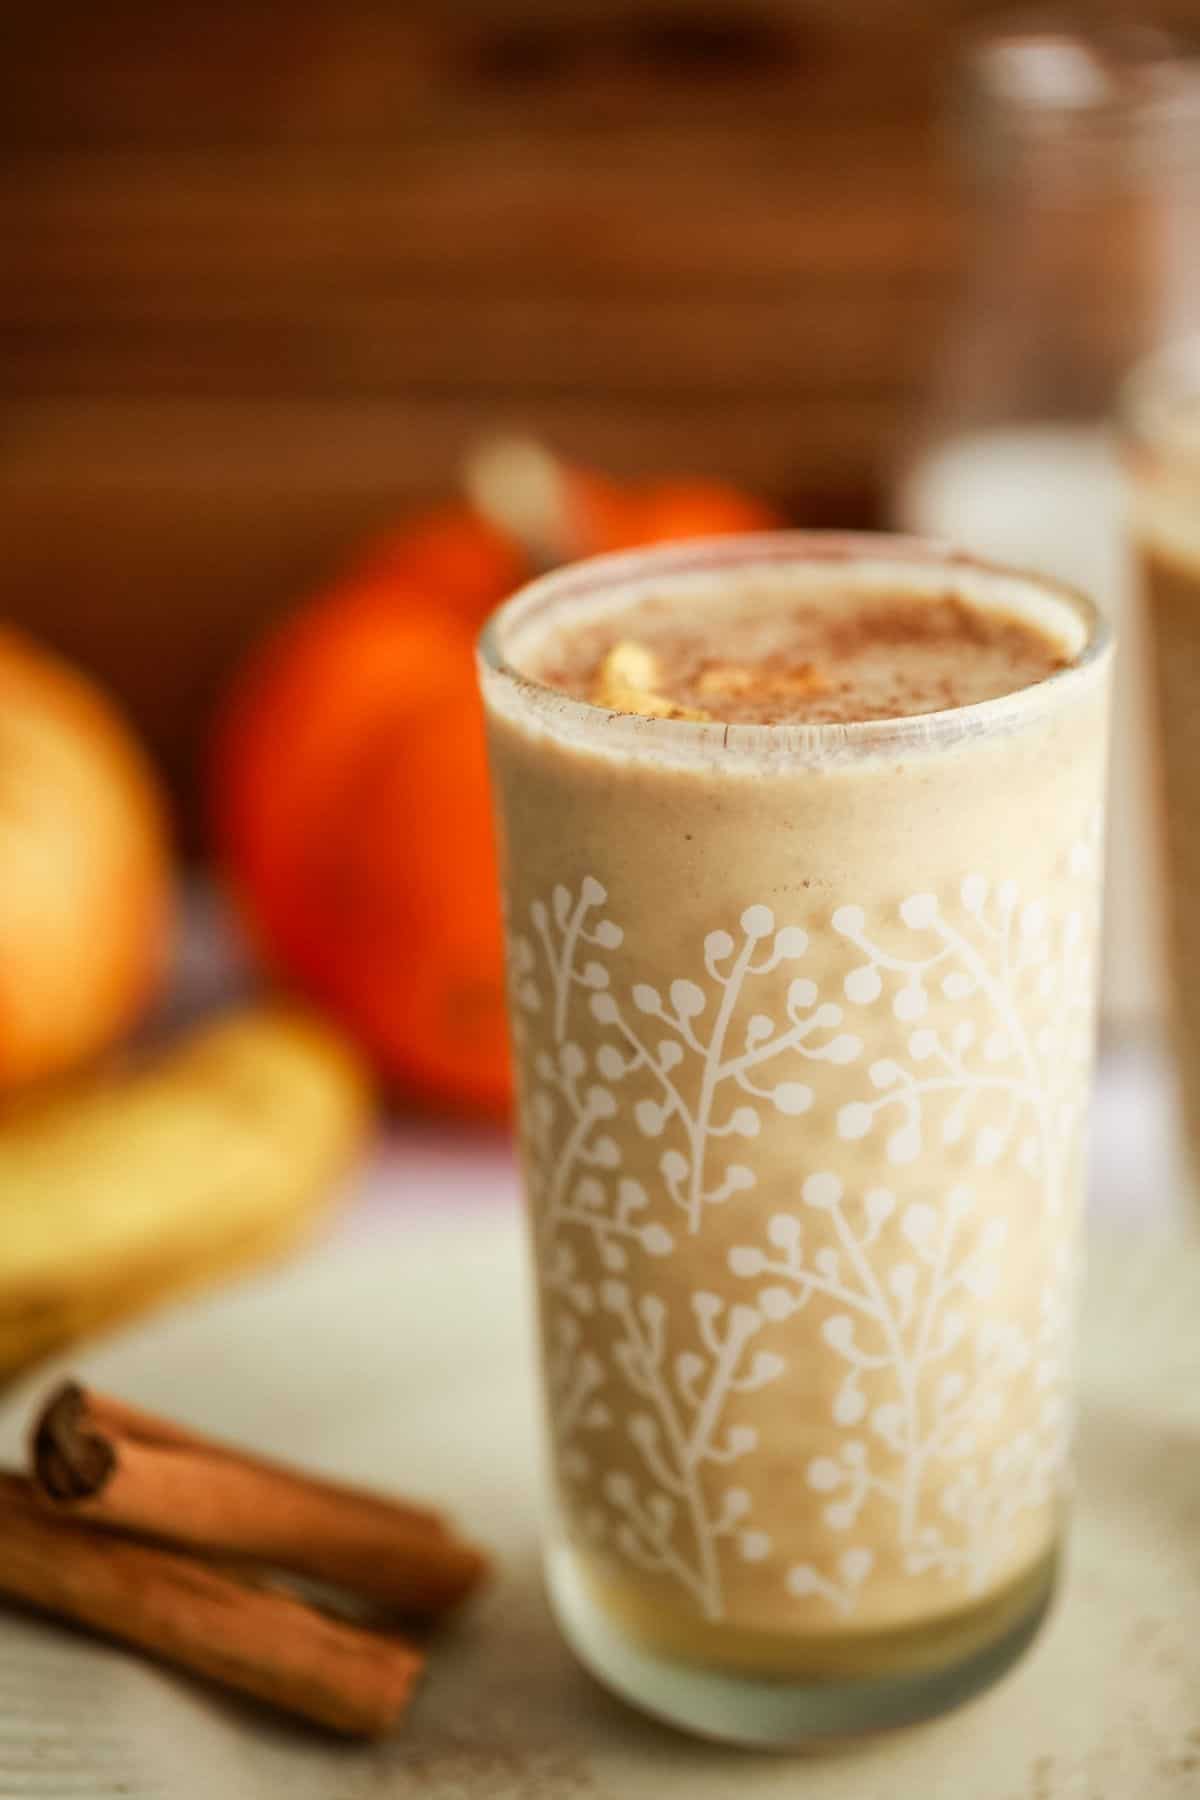 A tall glass of creamy drink topped with a little diced pumpkin. Sitting on a ceramic plate with cinnamon sticks. Pumpkins in the background.